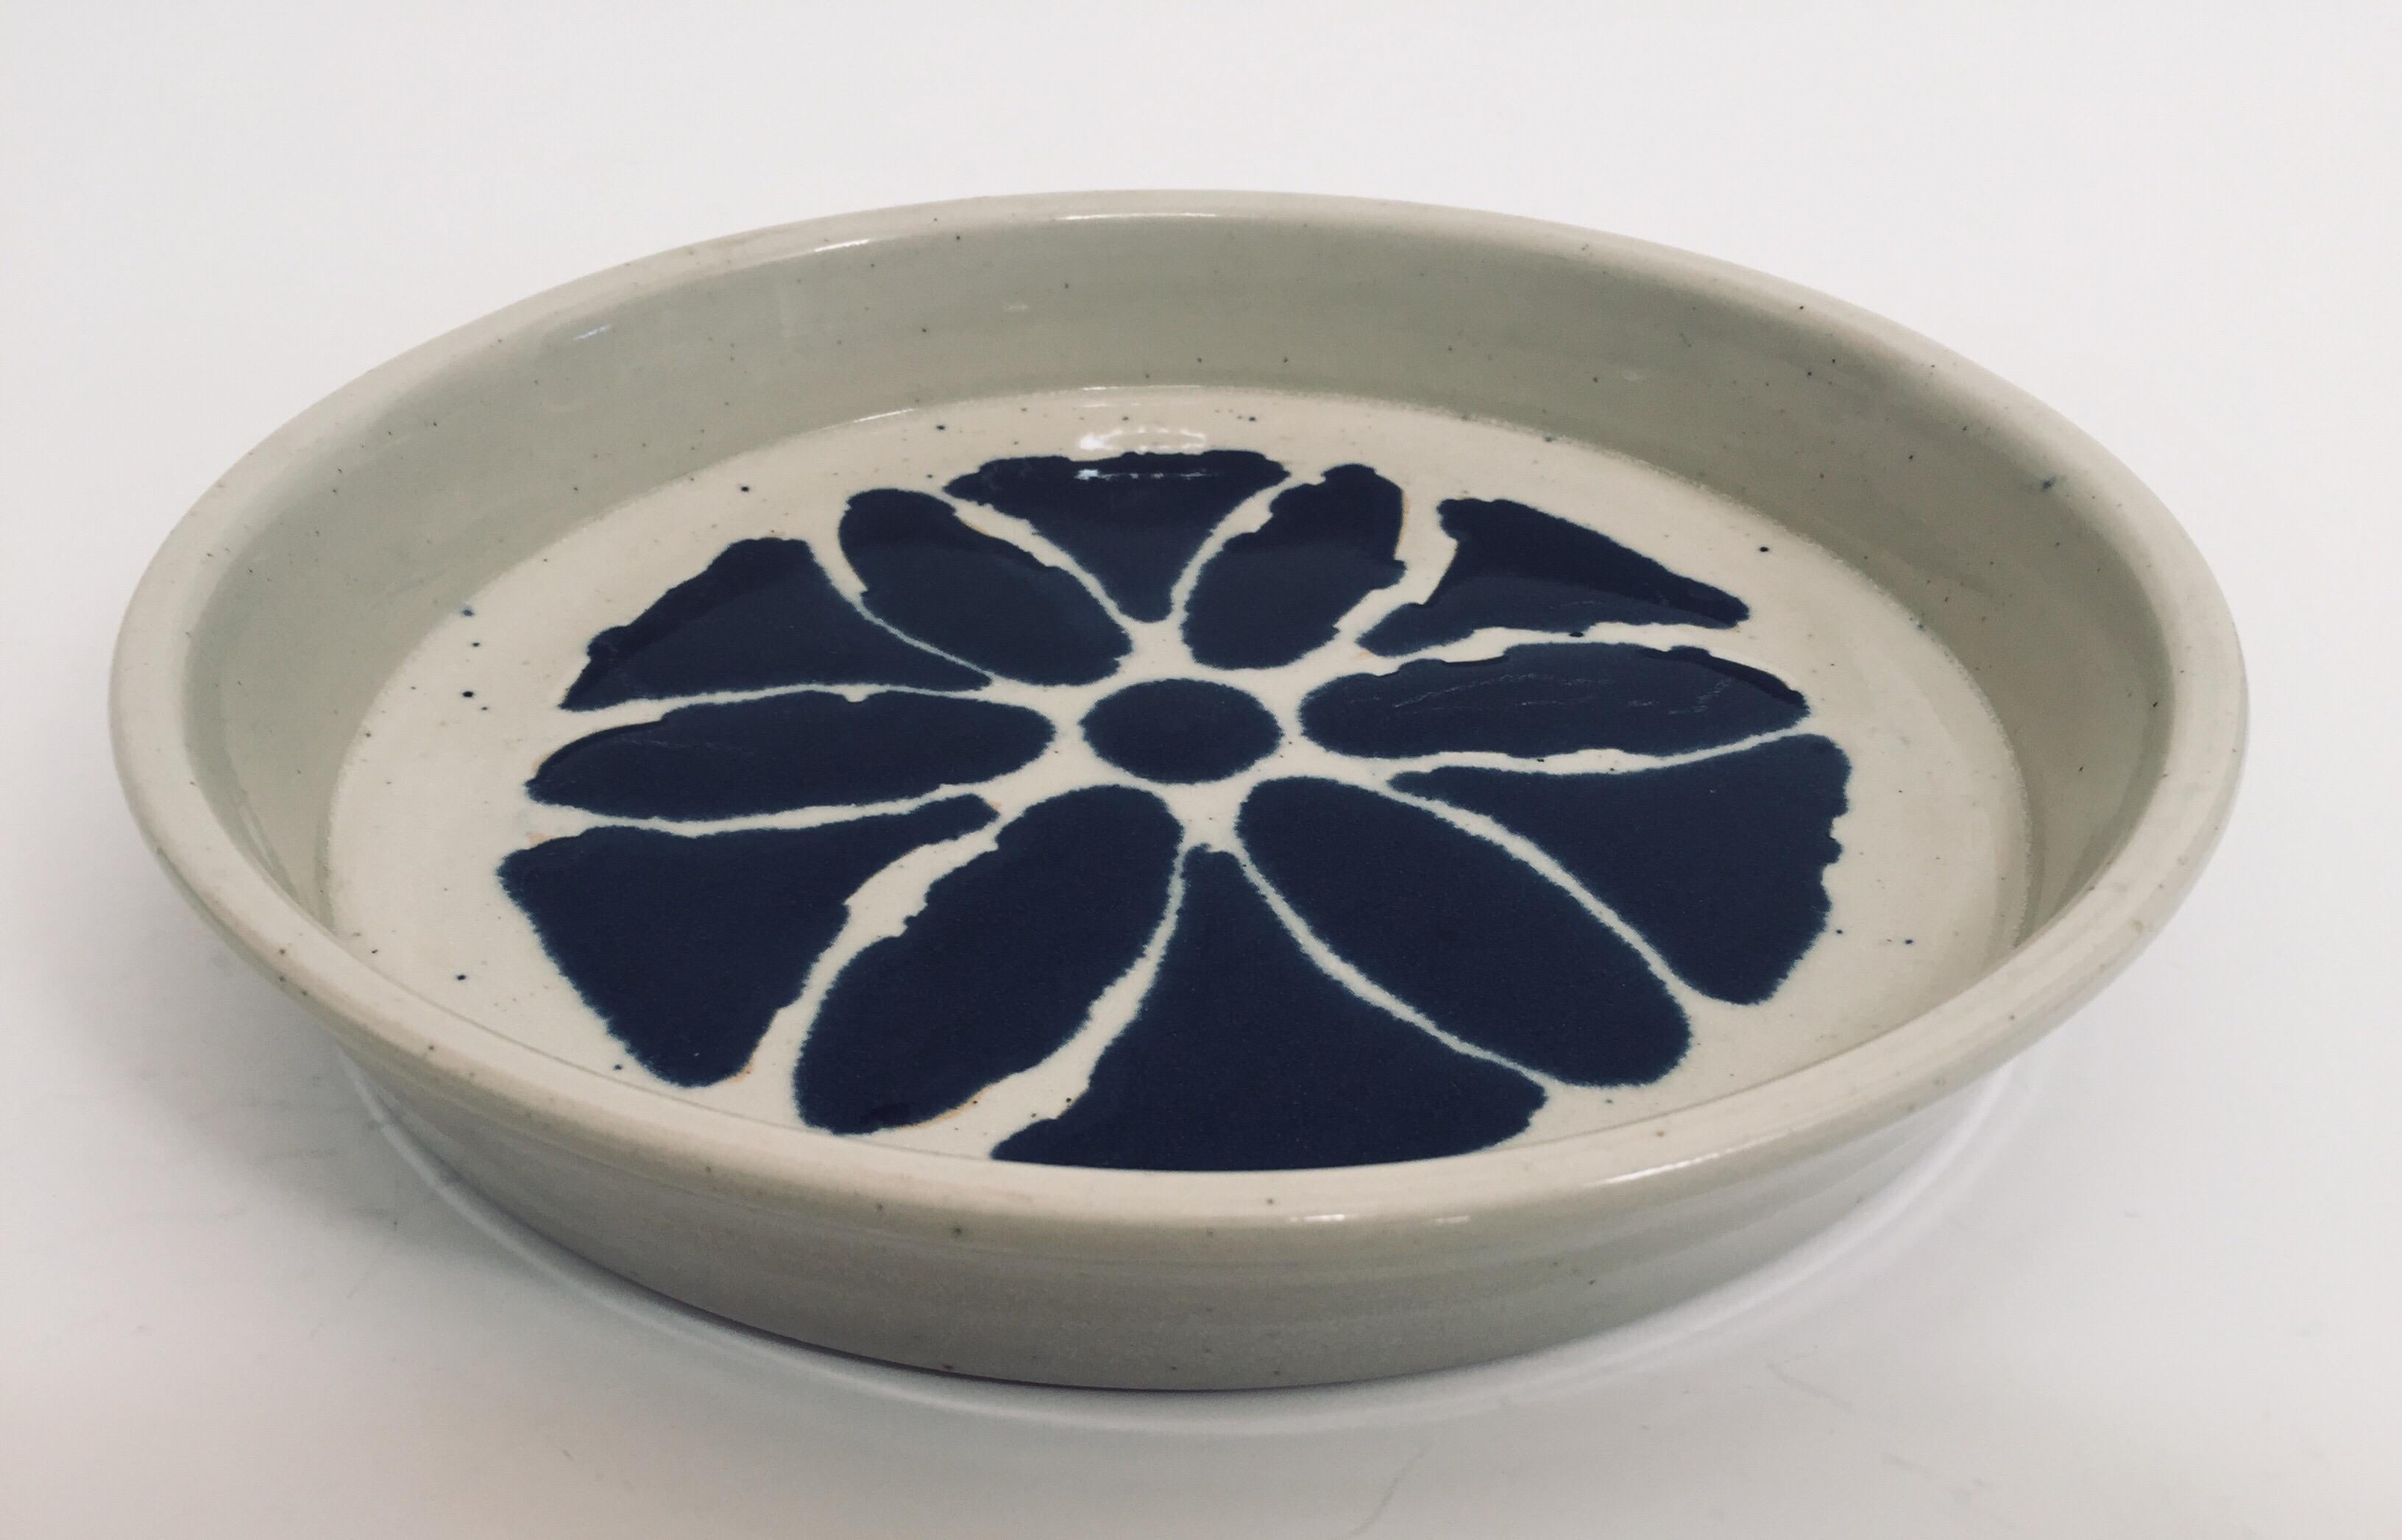 Wheel thrown pottery glazed with a white glaze decorated with a hand painted blue flower pattern.
This is a one of a kind object made in the ancient way by hand in a small artisanal pottery by Christy Johnson. 
Made by hand in Los Angeles,